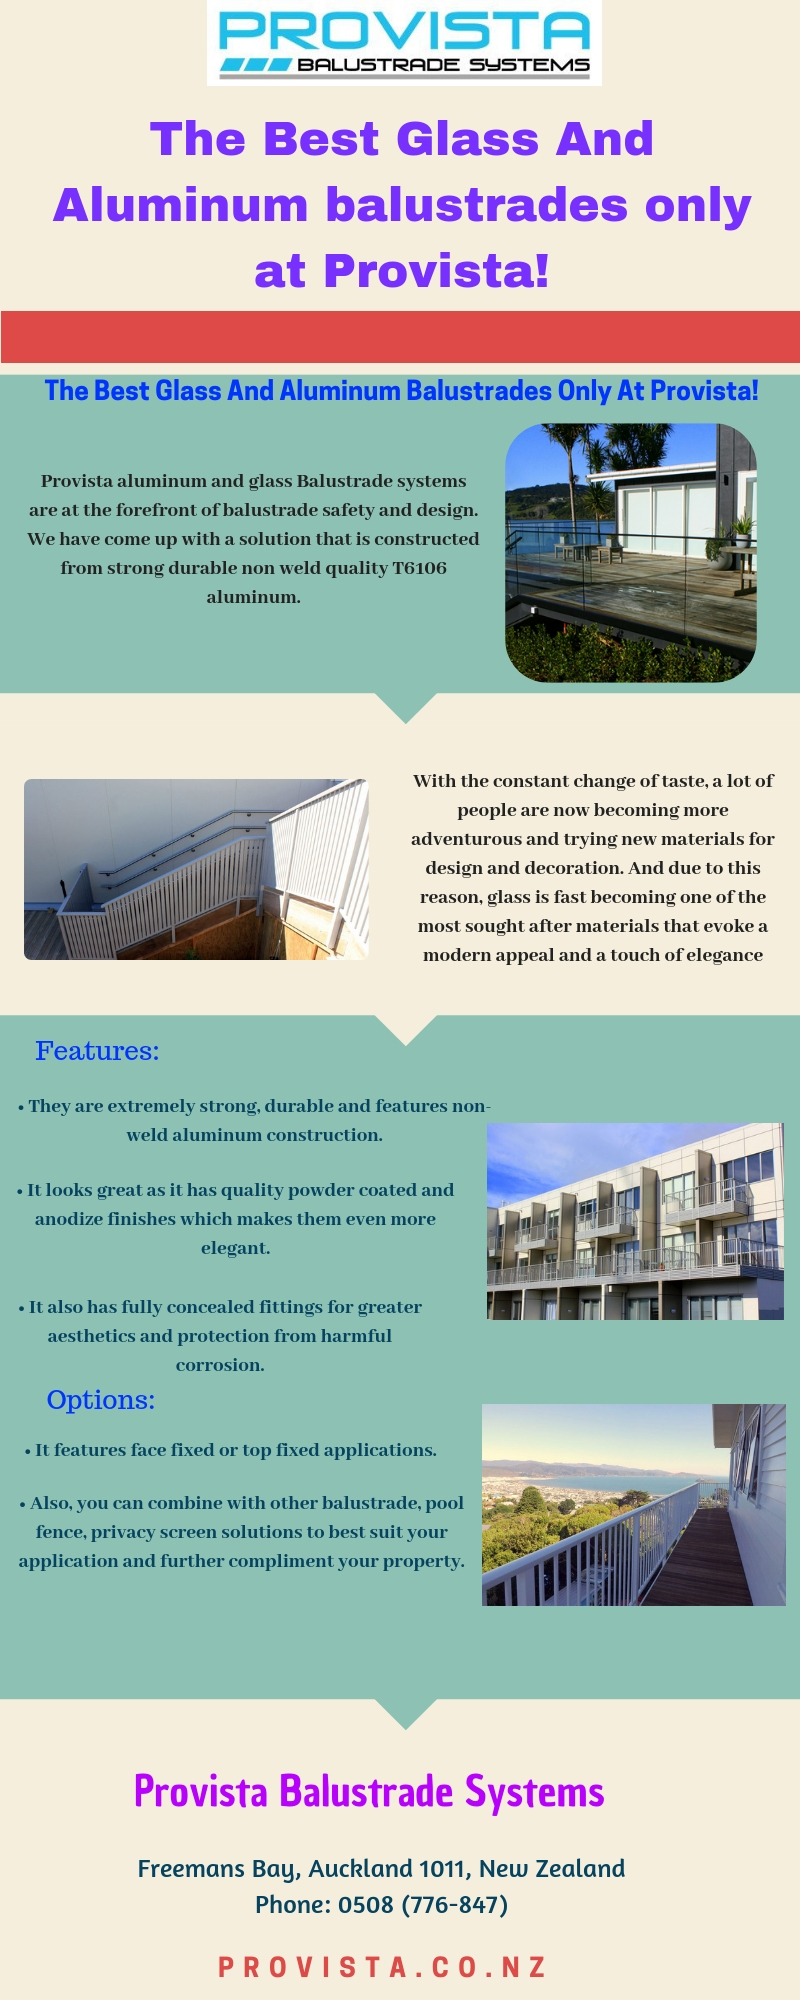 The best glass and aluminum balustrades only at Provista!.jpg Glass and aluminum balustrades are the new favourites for NZ architects. But where can you find the best products? For more details, visit this link: https://bit.ly/2PFlMMg
 by Provista